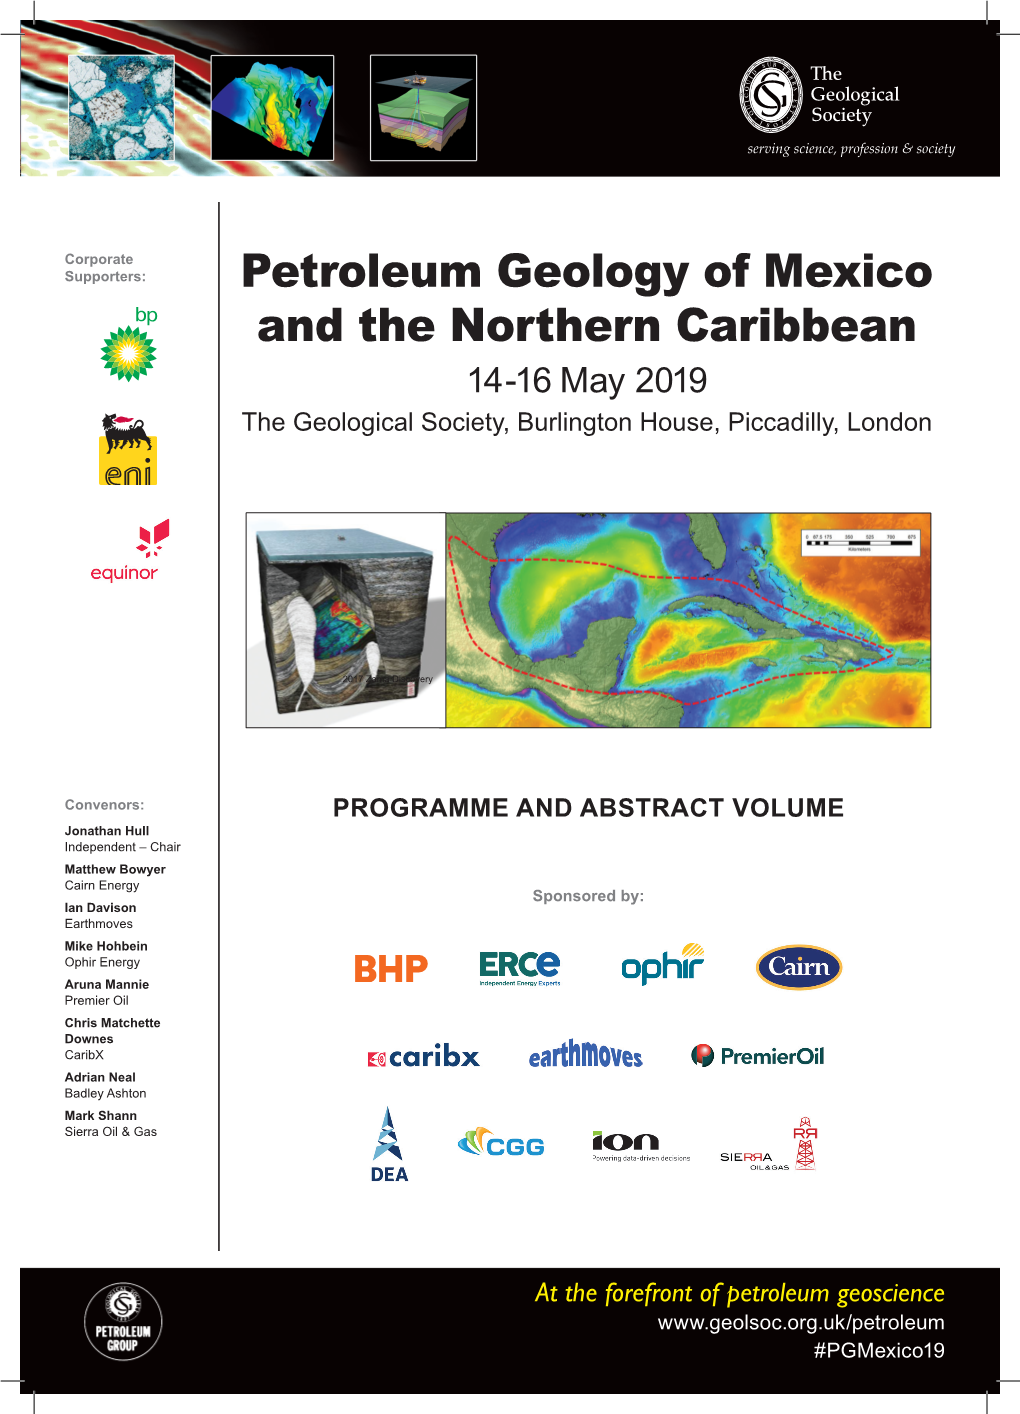 Petroleum Geology of Mexico and the Northern Caribbean 14-16 May 2019 the Geological Society, Burlington House, Piccadilly, London